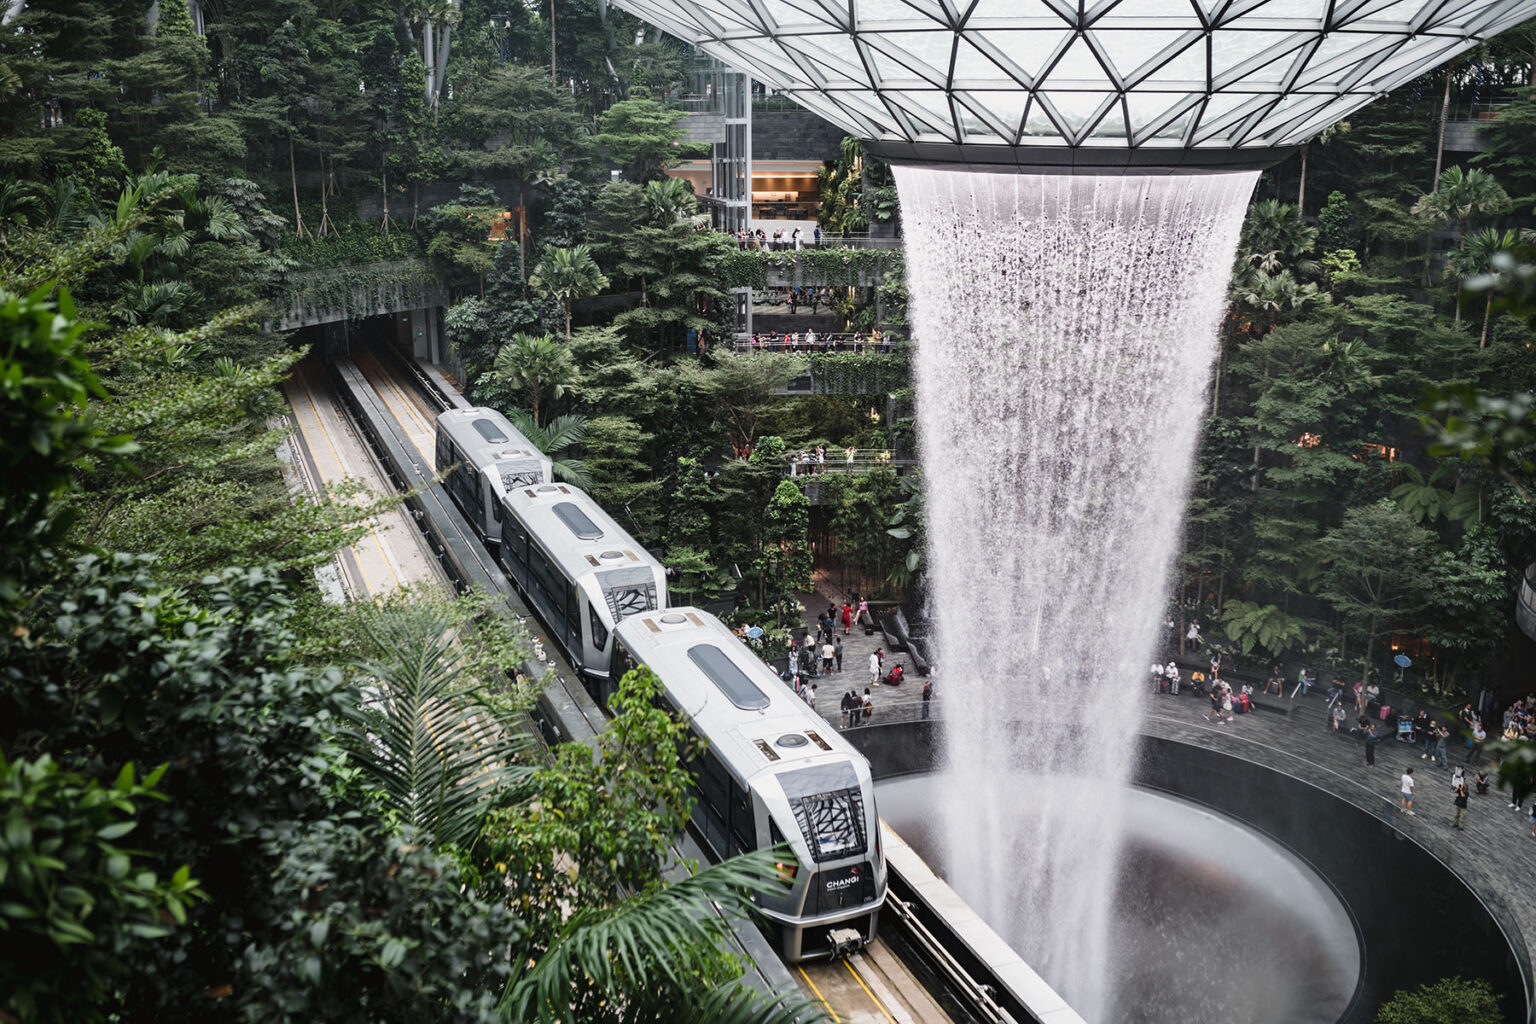 The HSBC Rain Vortex in Jewel Changi Airport is a massive waterfall pouring own. It is surrounded by green nature and a metro is driving by.